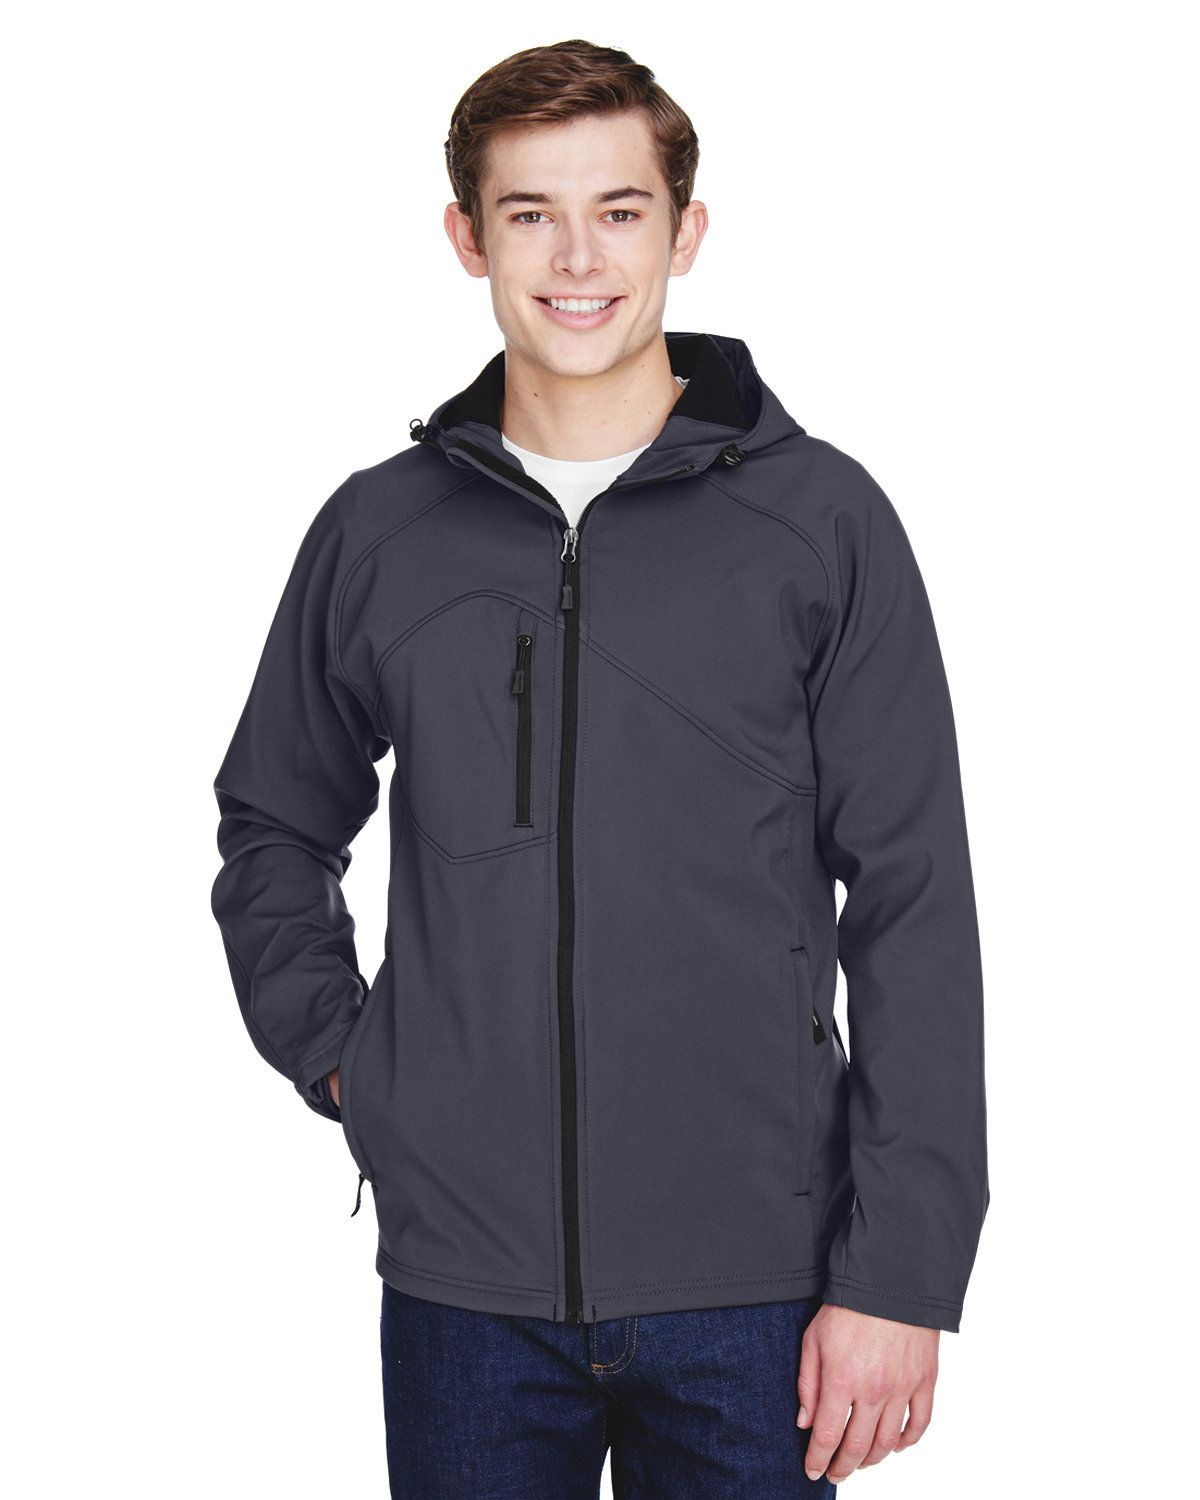 North End Men's Prospect Two-Layer Fleece Bonded Soft Shell Hooded Jacket FOSSIL GREY 